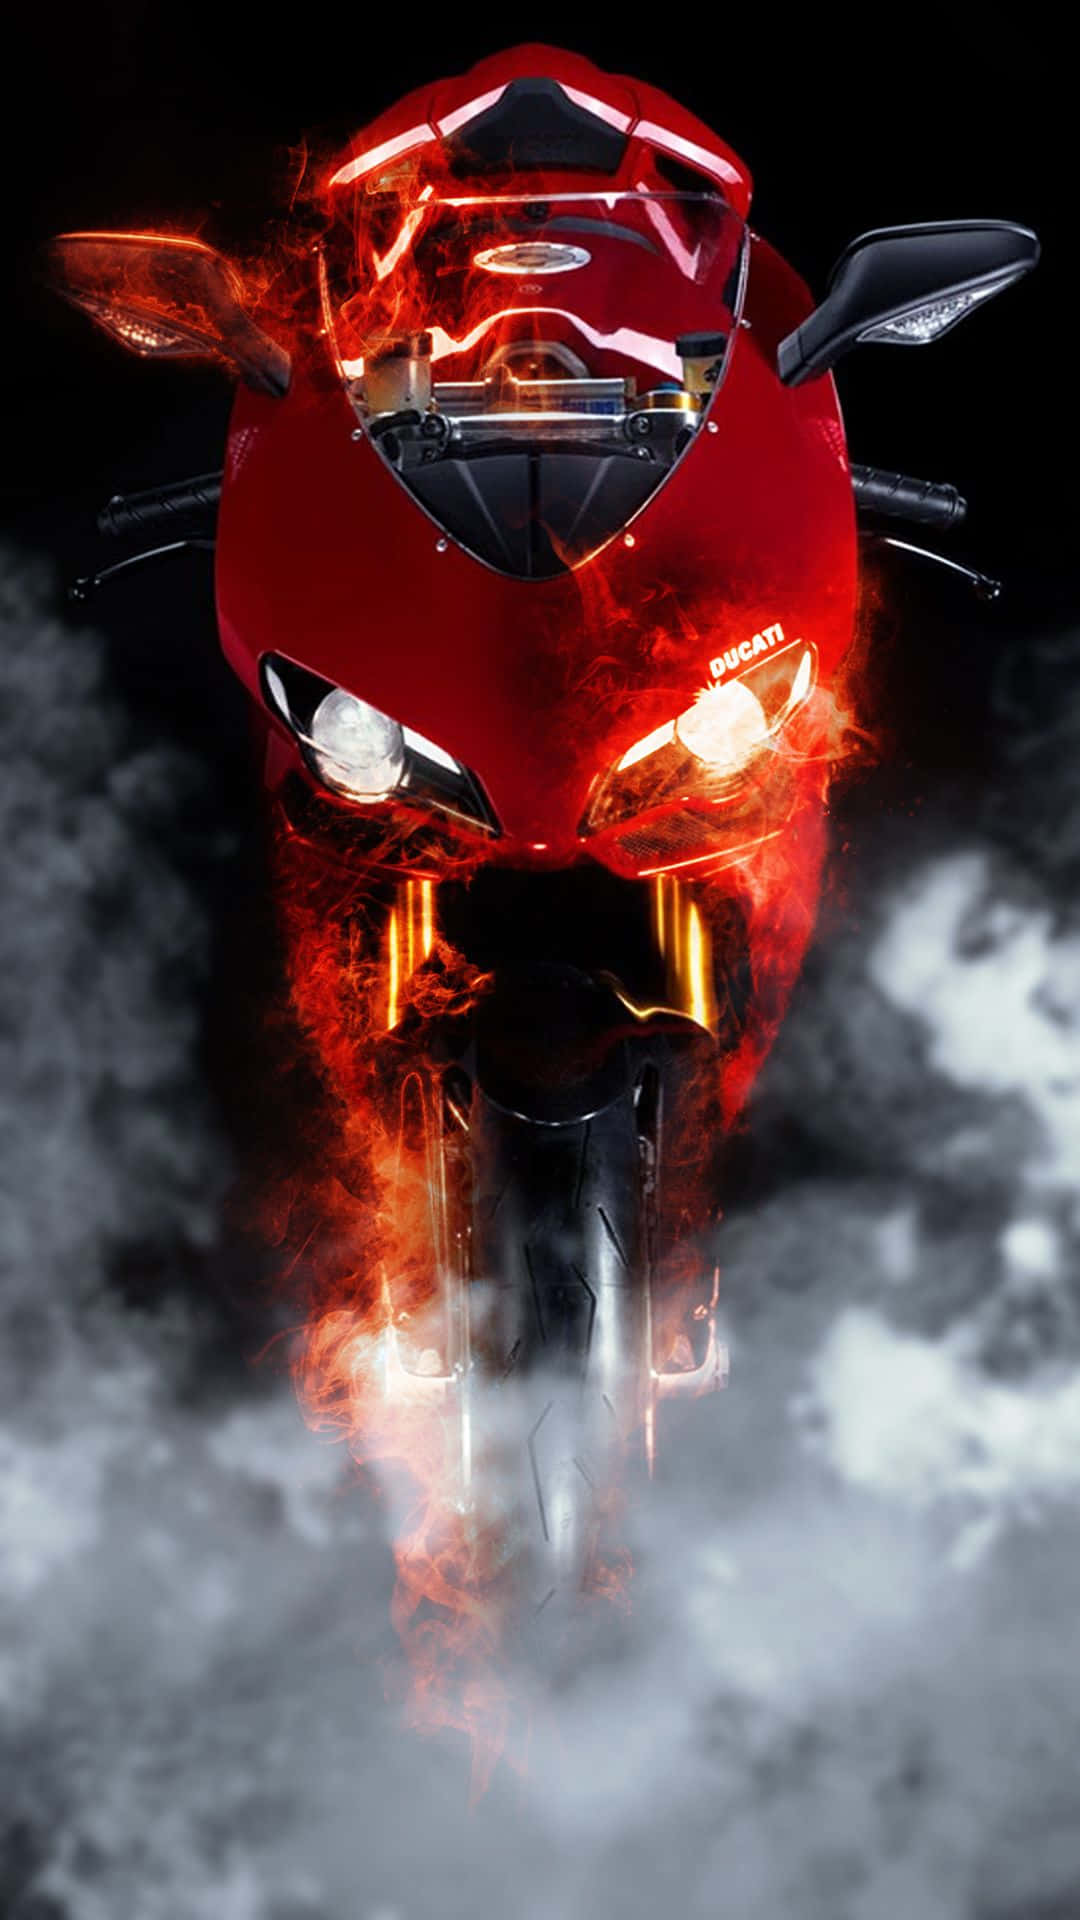 A Red Motorcycle With Flames